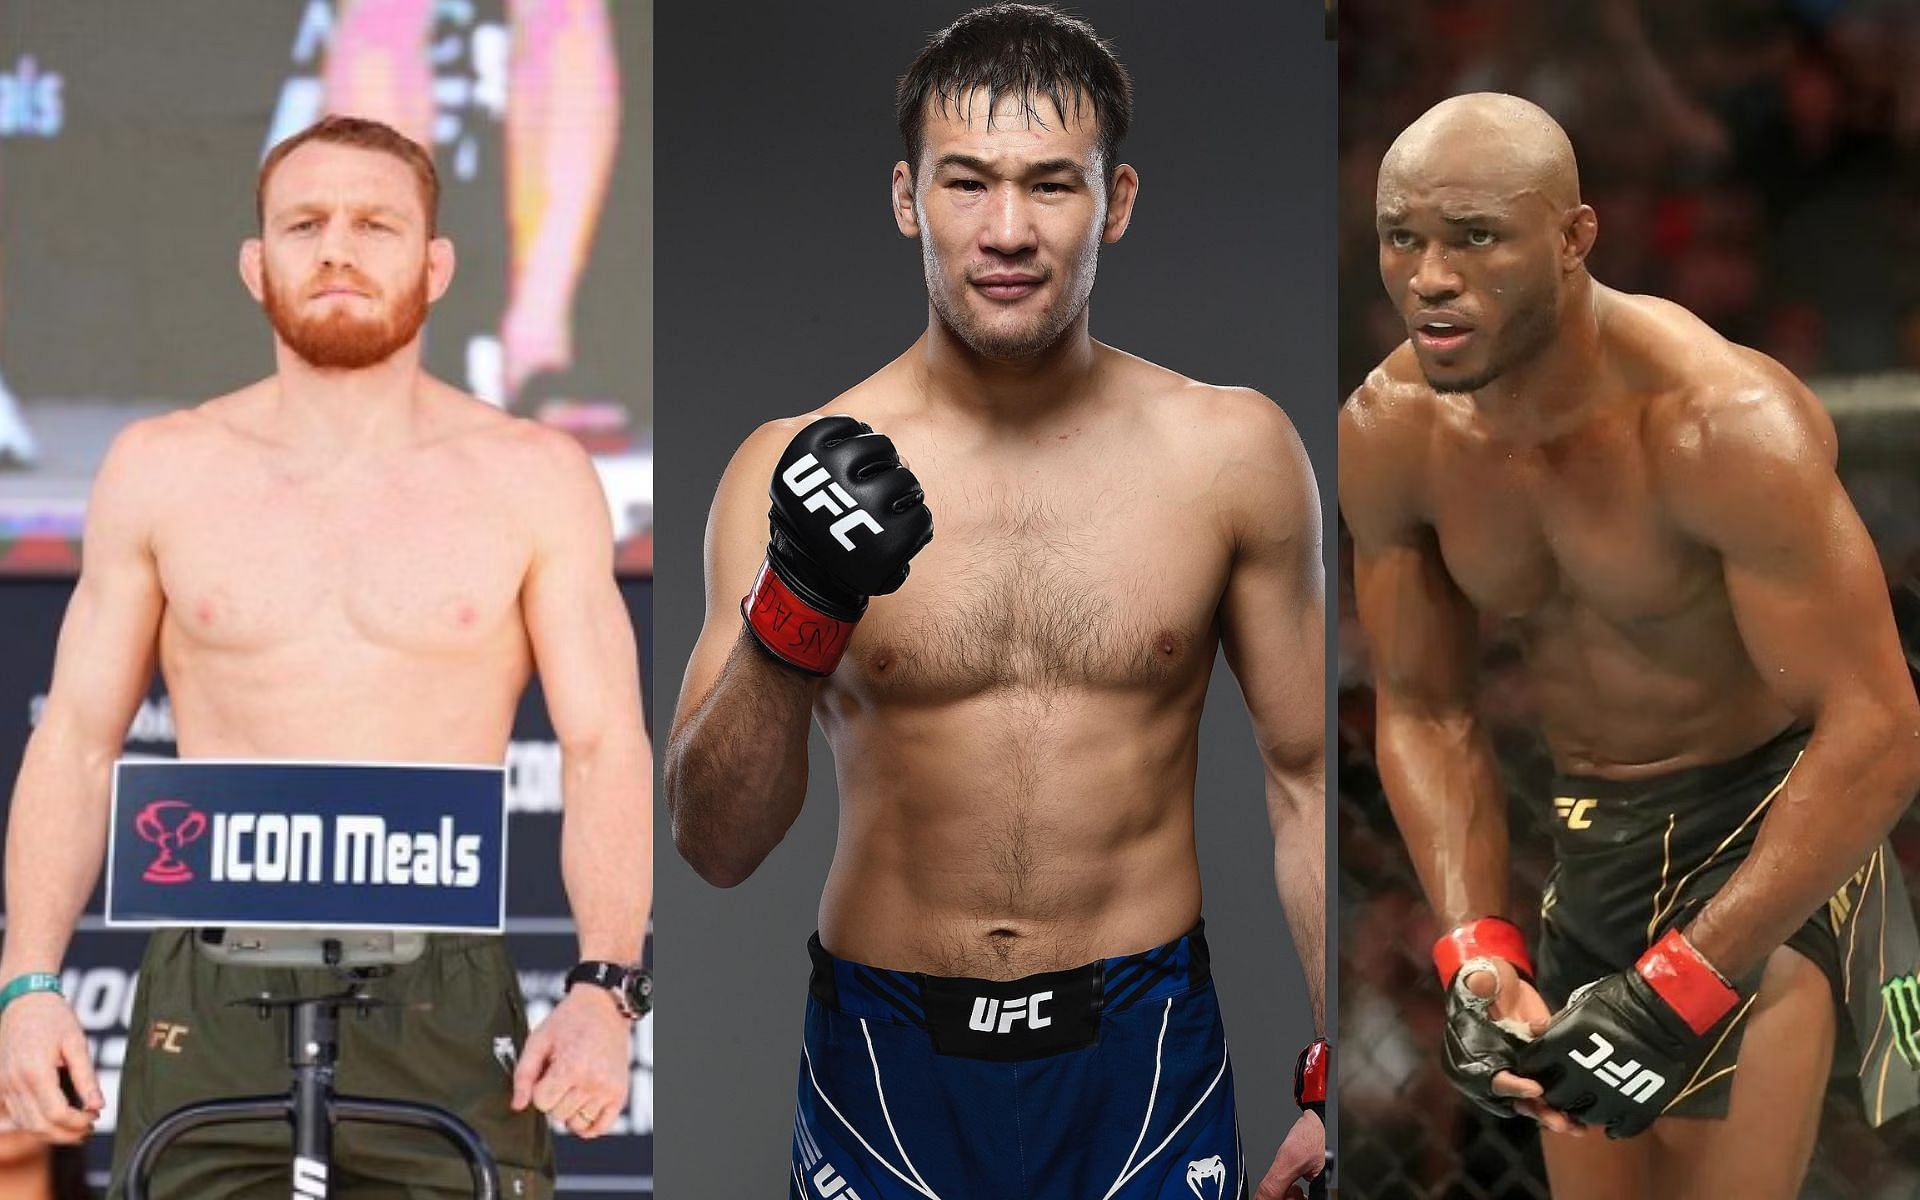 Jack Della Maddalena (left) is interested in Kamaru Usman (right) if a Shavkat Rakhmonov (middle) bout is not eventually booked [Image Courtesy: @shavkatrakhmonov94 and @jackdellamaddalena on Instagram as well as @USMAN84kg on X]